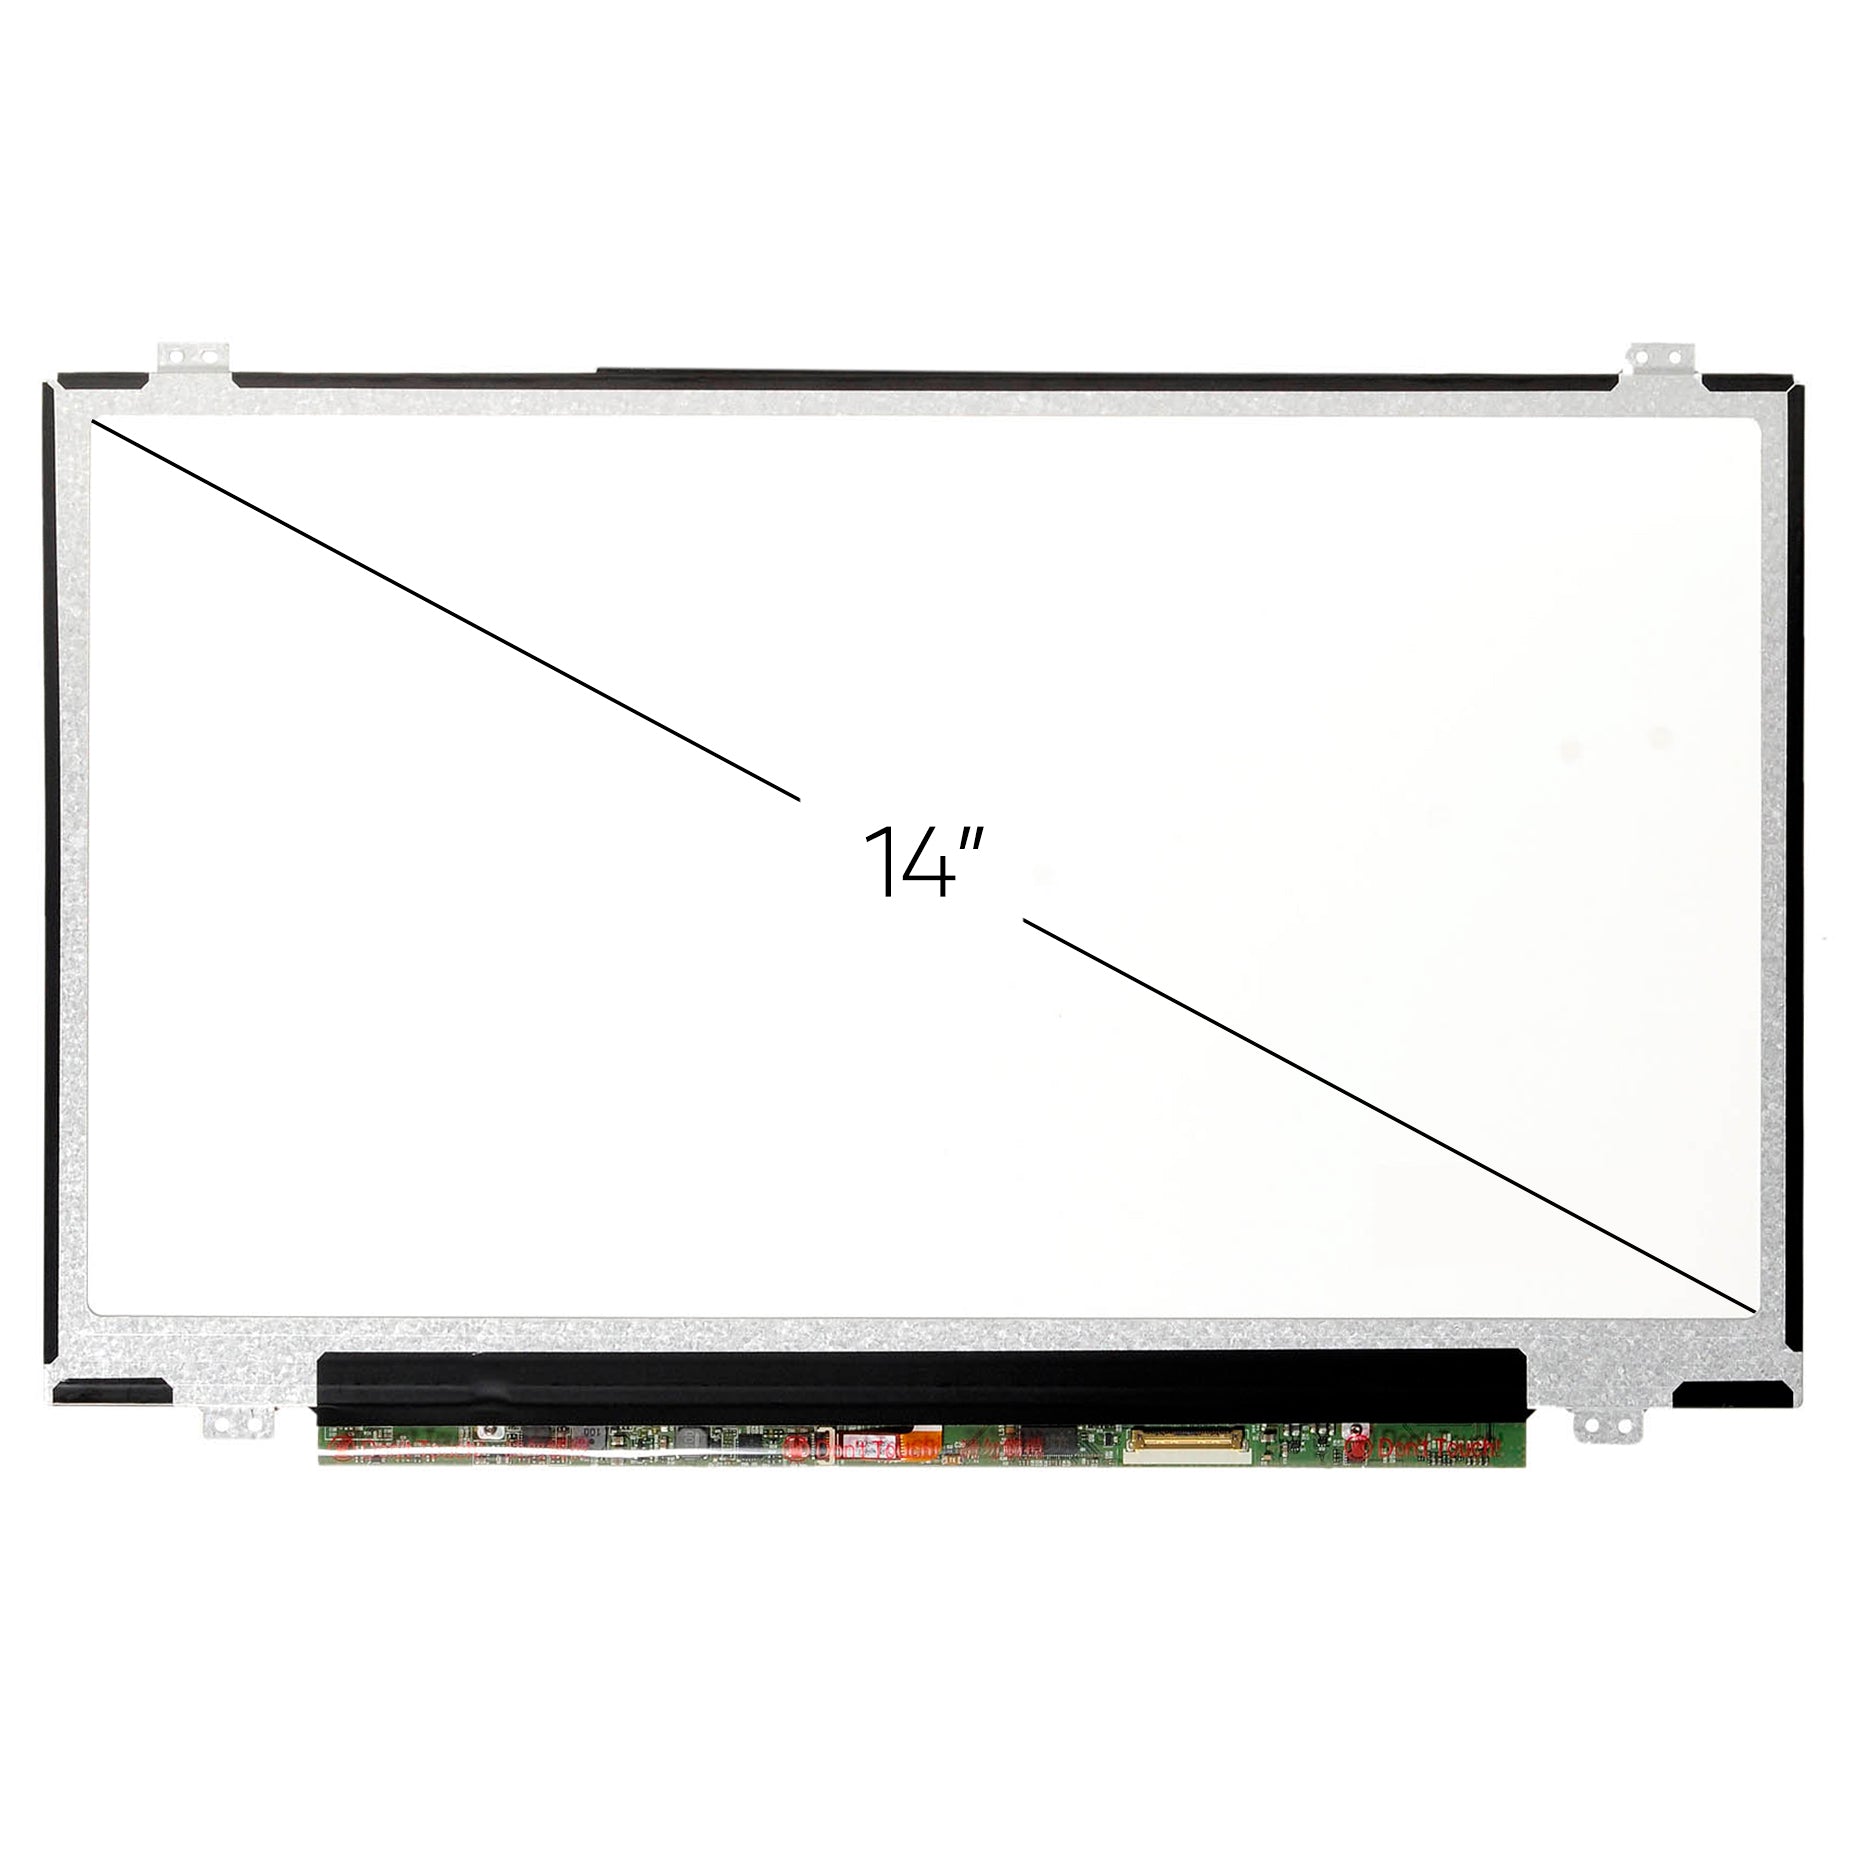 Screen Replacement for Lenovo Thinkpad T460 FHD 1920x1080 IPS Matte LCD LED Display